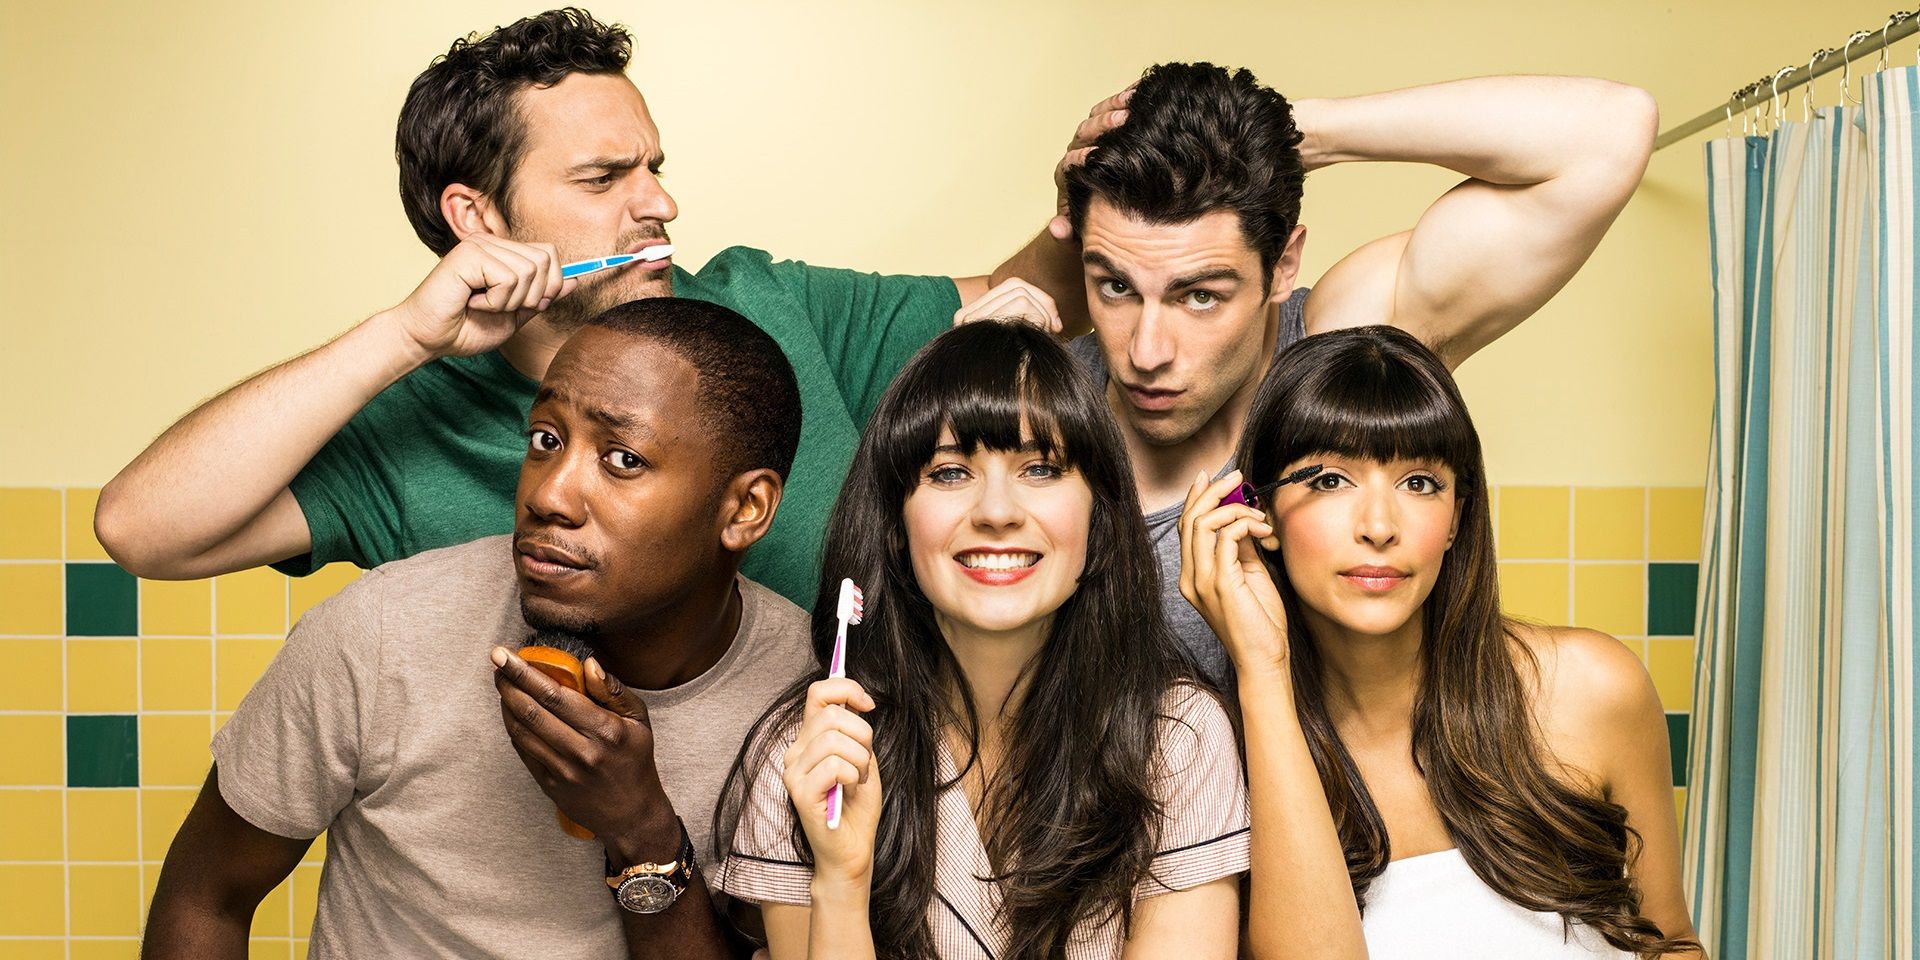 The cast of New Girl is on a poster.